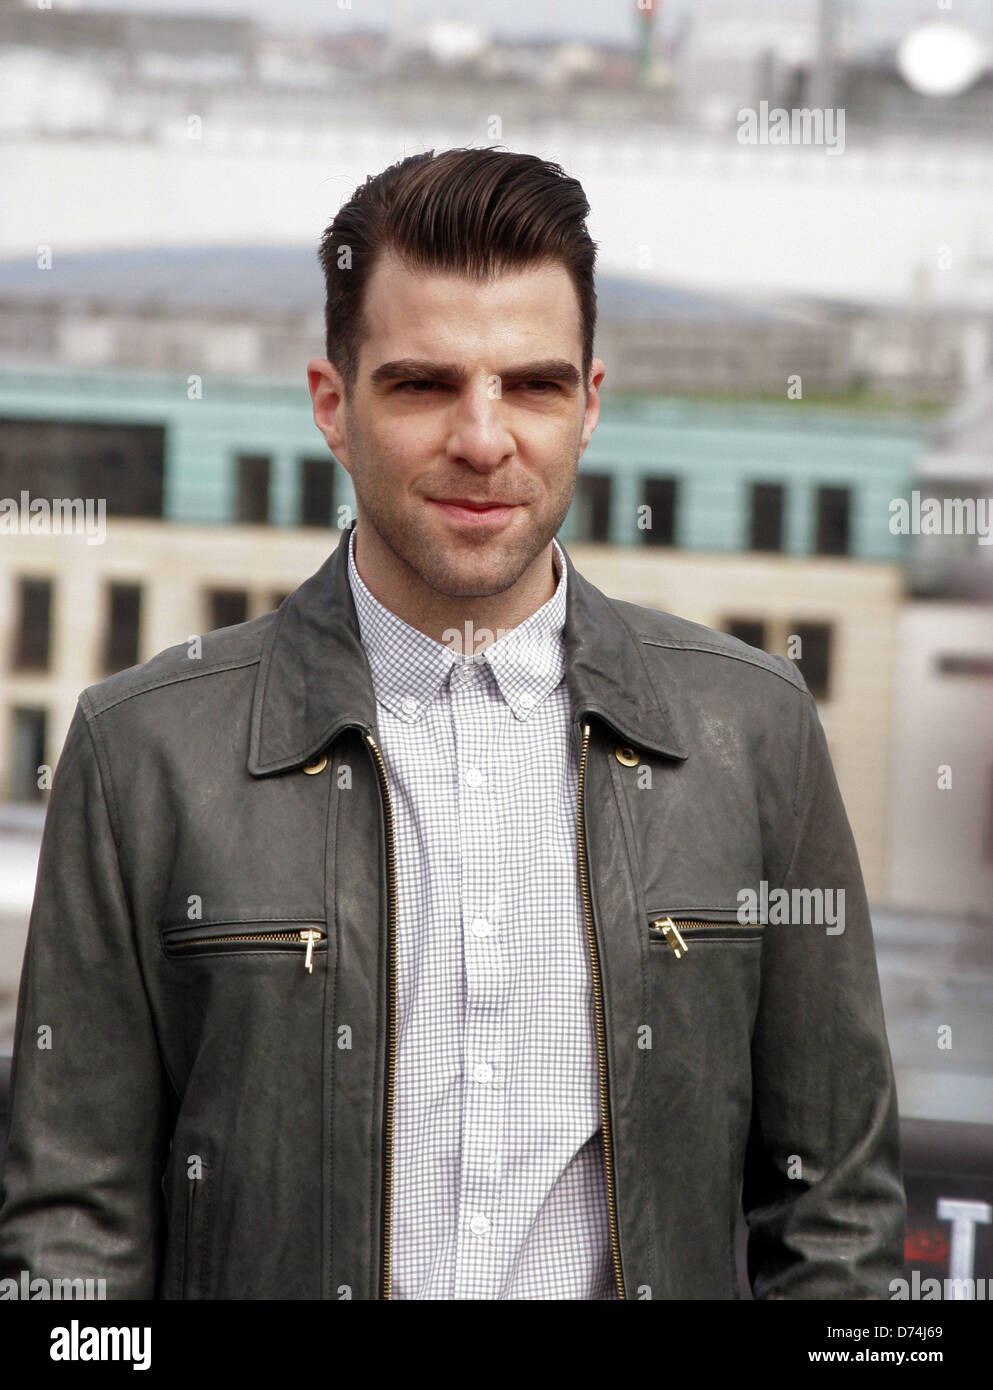 Berlin, Germany. 28th April, 2013. US actor Zachary Quinto poses during the presentation of the movie 'Star Trek Into Darkness' in Berlin, Germany, 28 April 2013. The film will be released in Germany on 09 May 2013. Photo: XAMAX/dpa/dpa/Alamy Live News Stock Photo